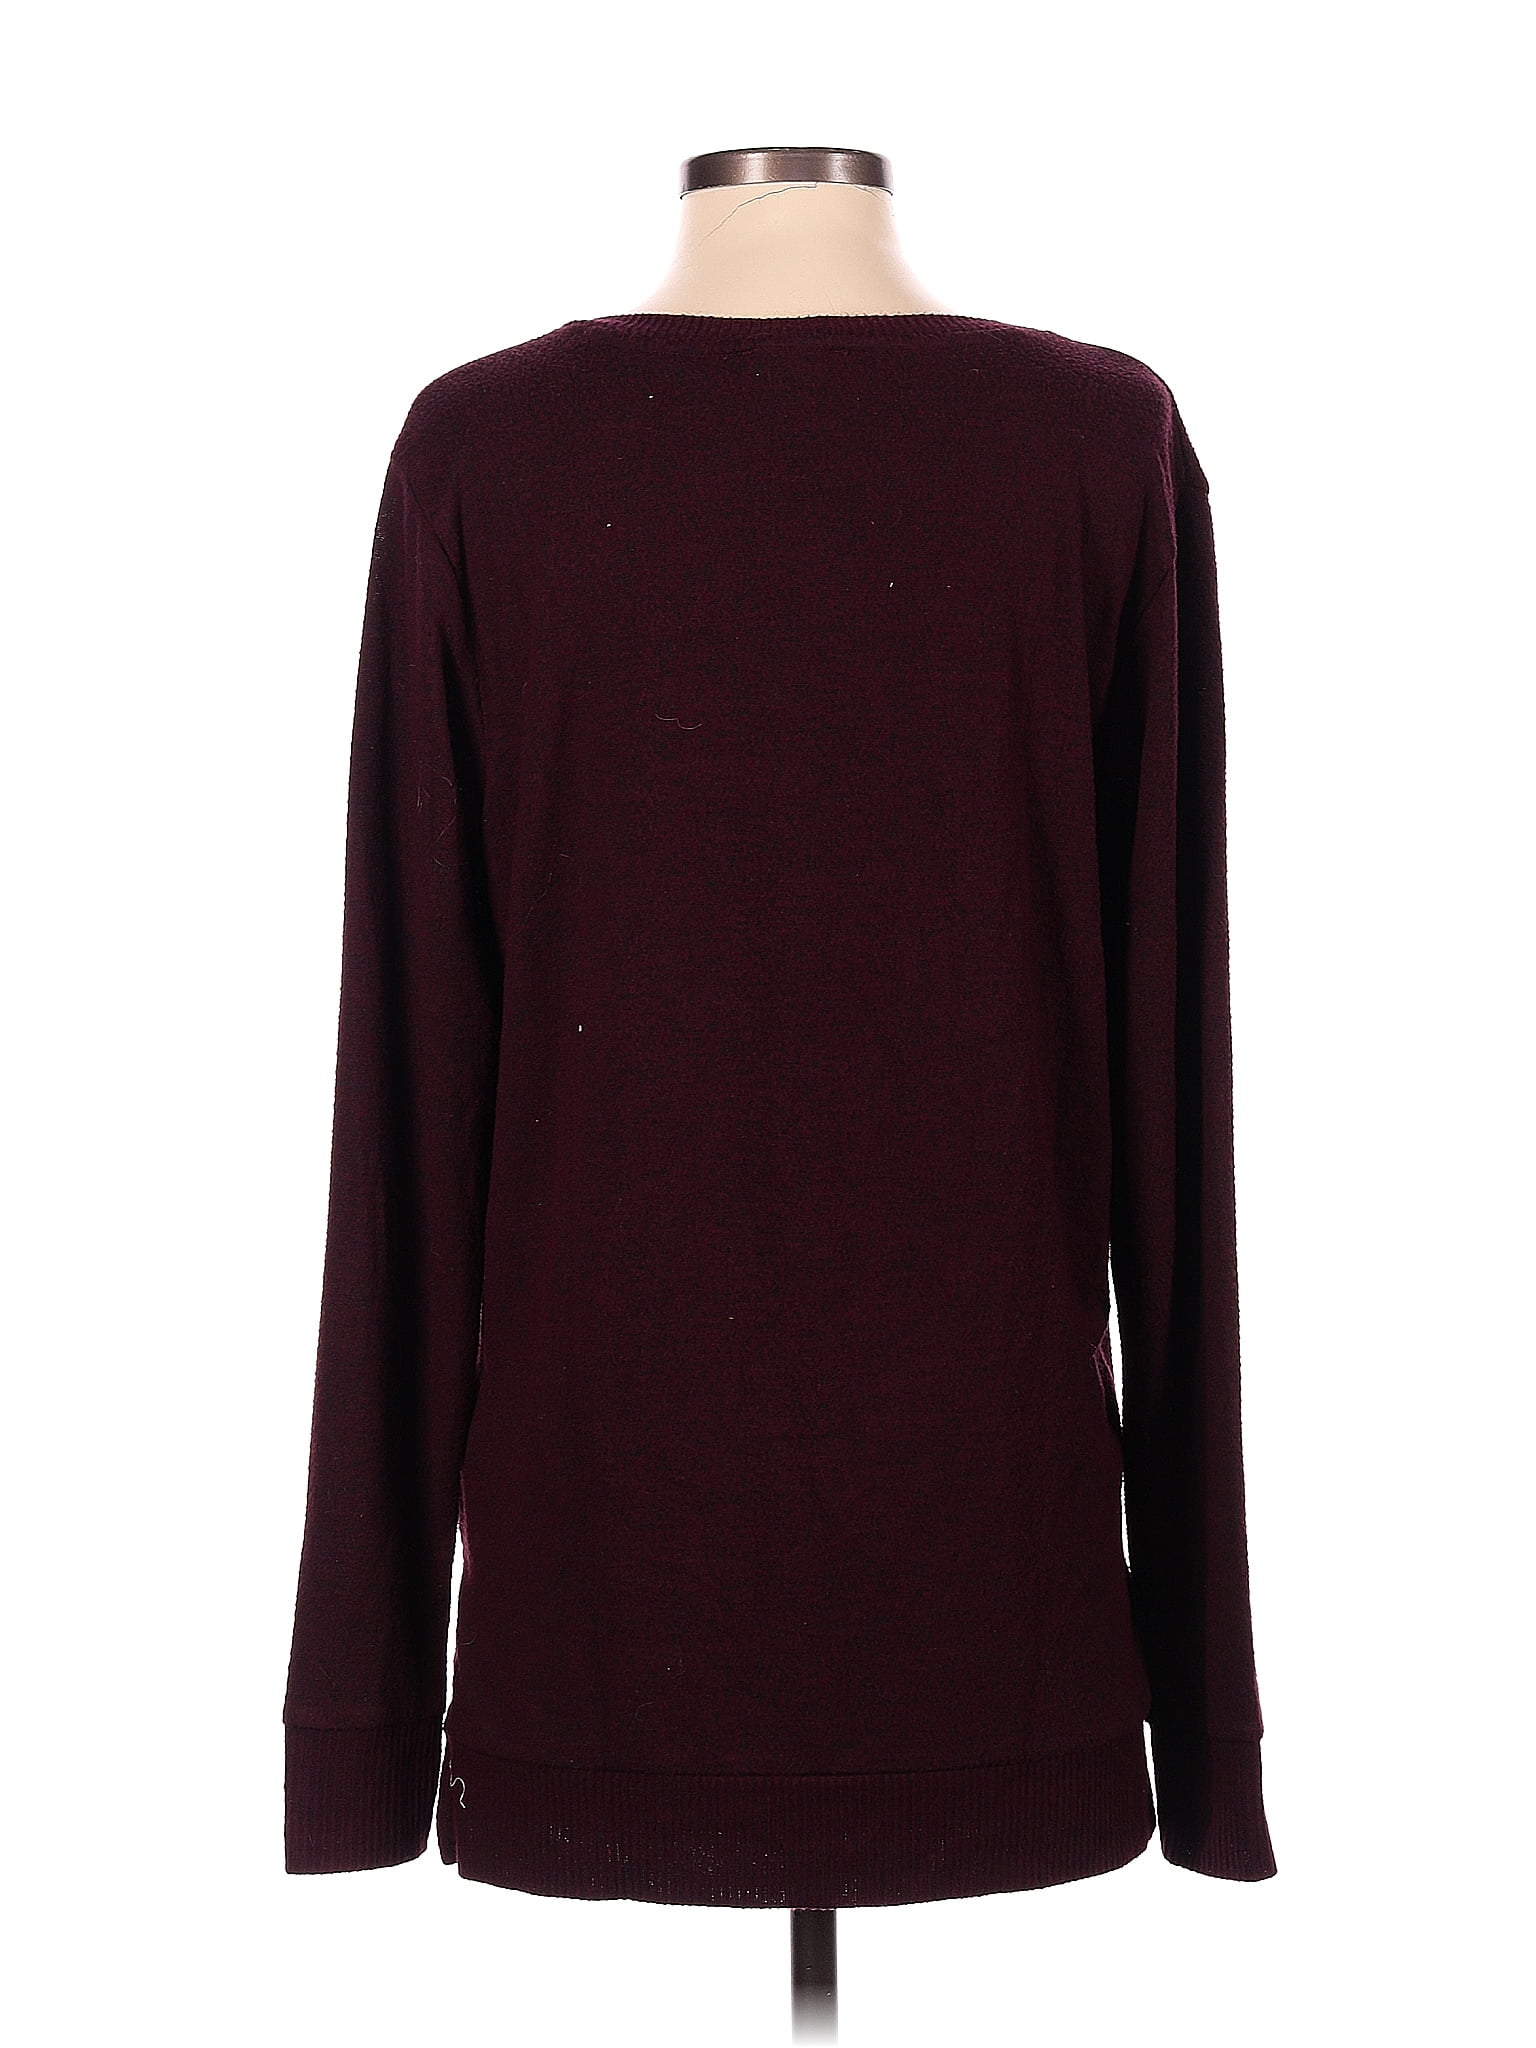 Lucky Brand Maroon Burgundy Long Sleeve Top Size S - 70% off